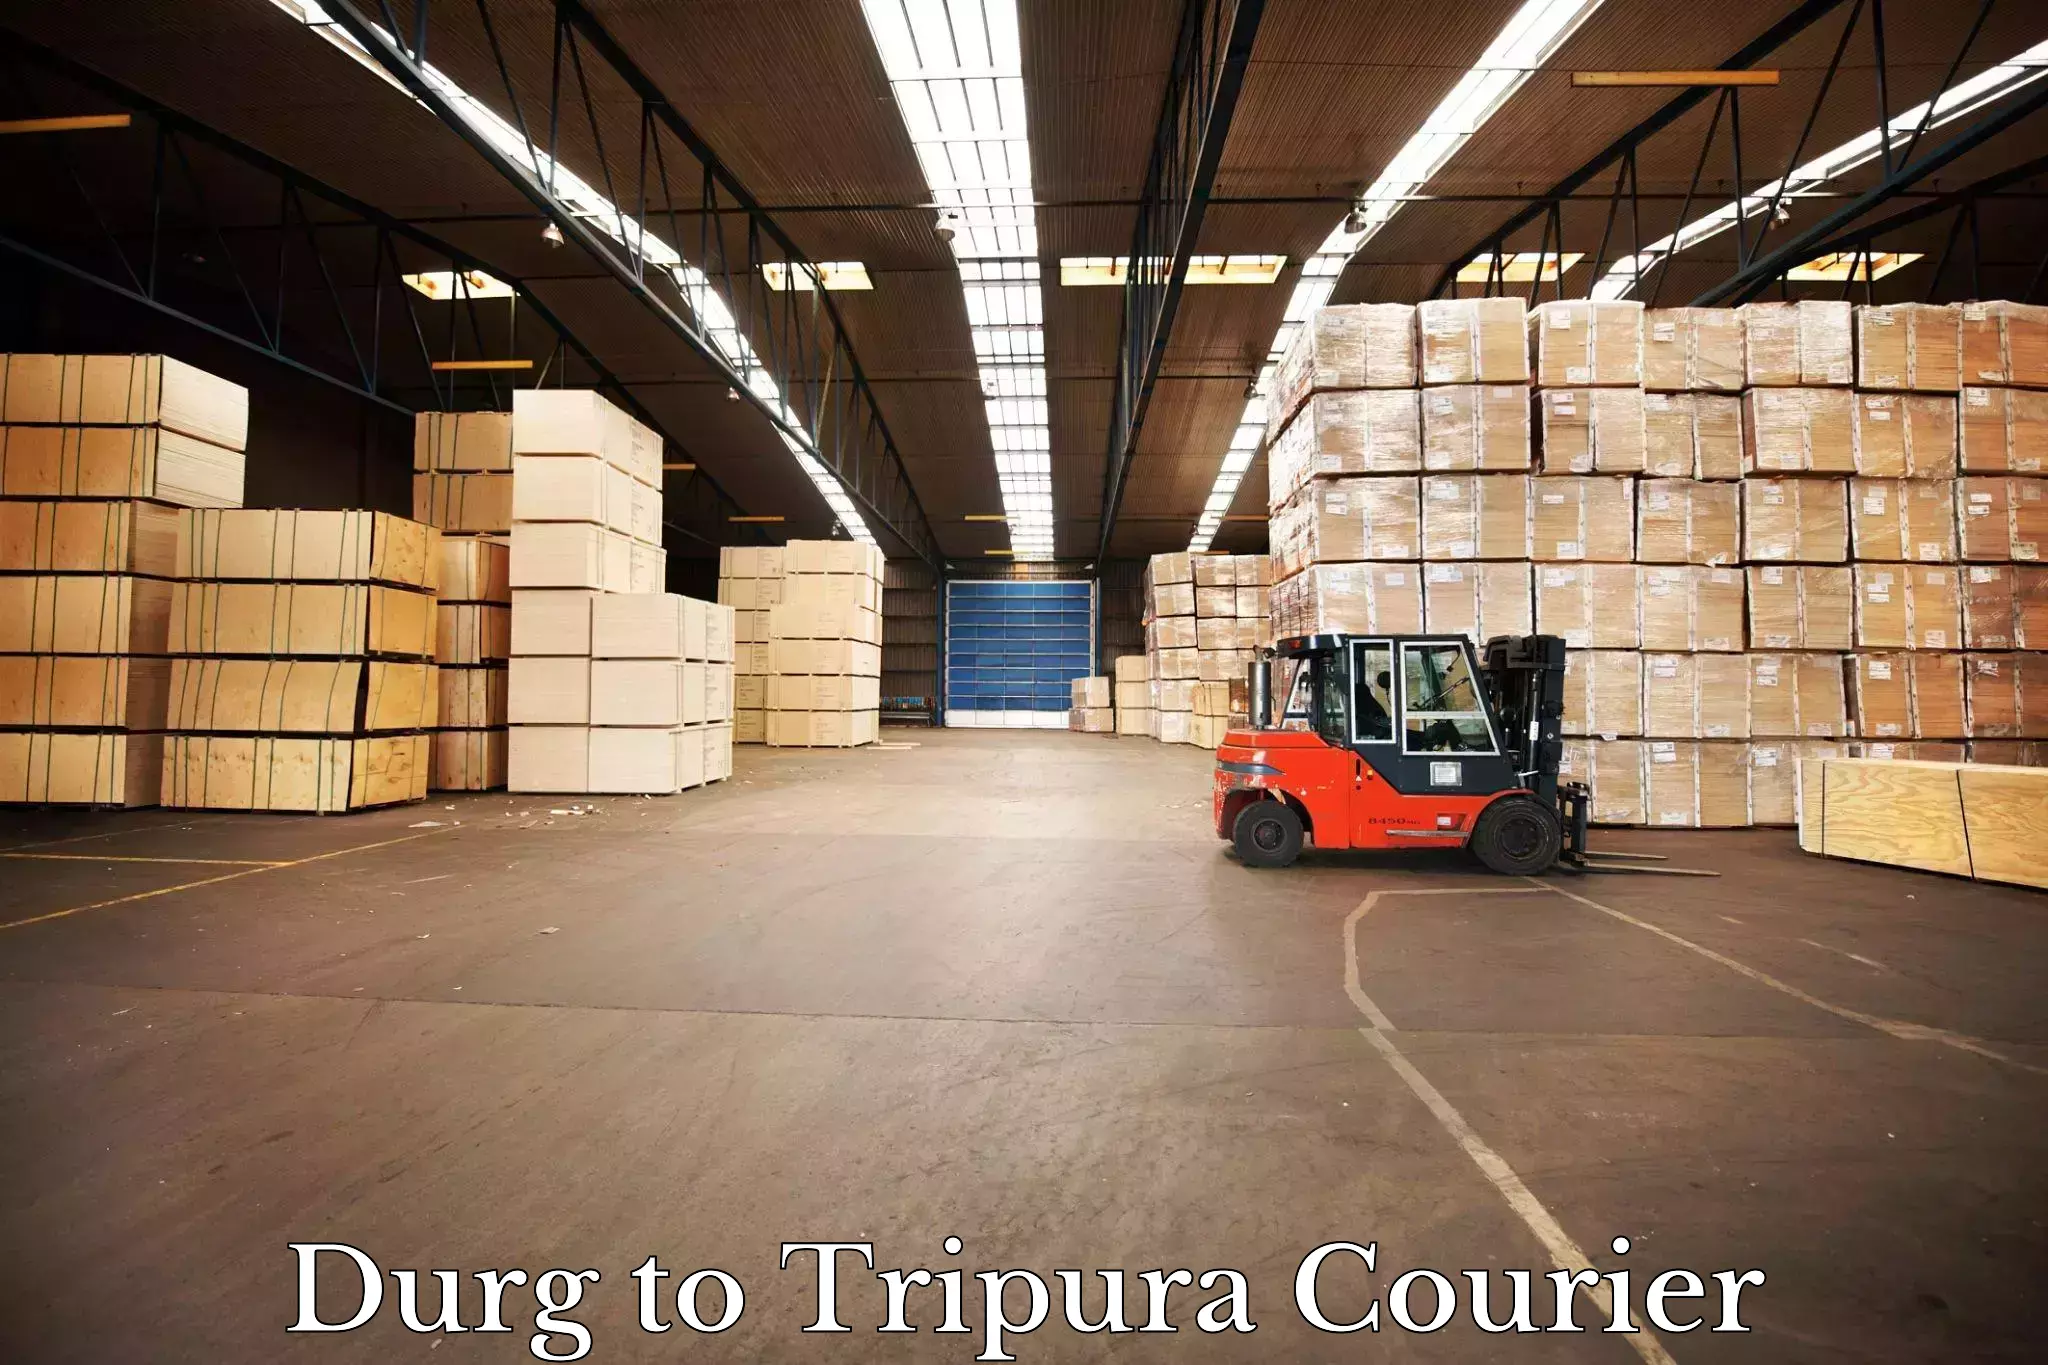 On-demand courier Durg to Udaipur Tripura